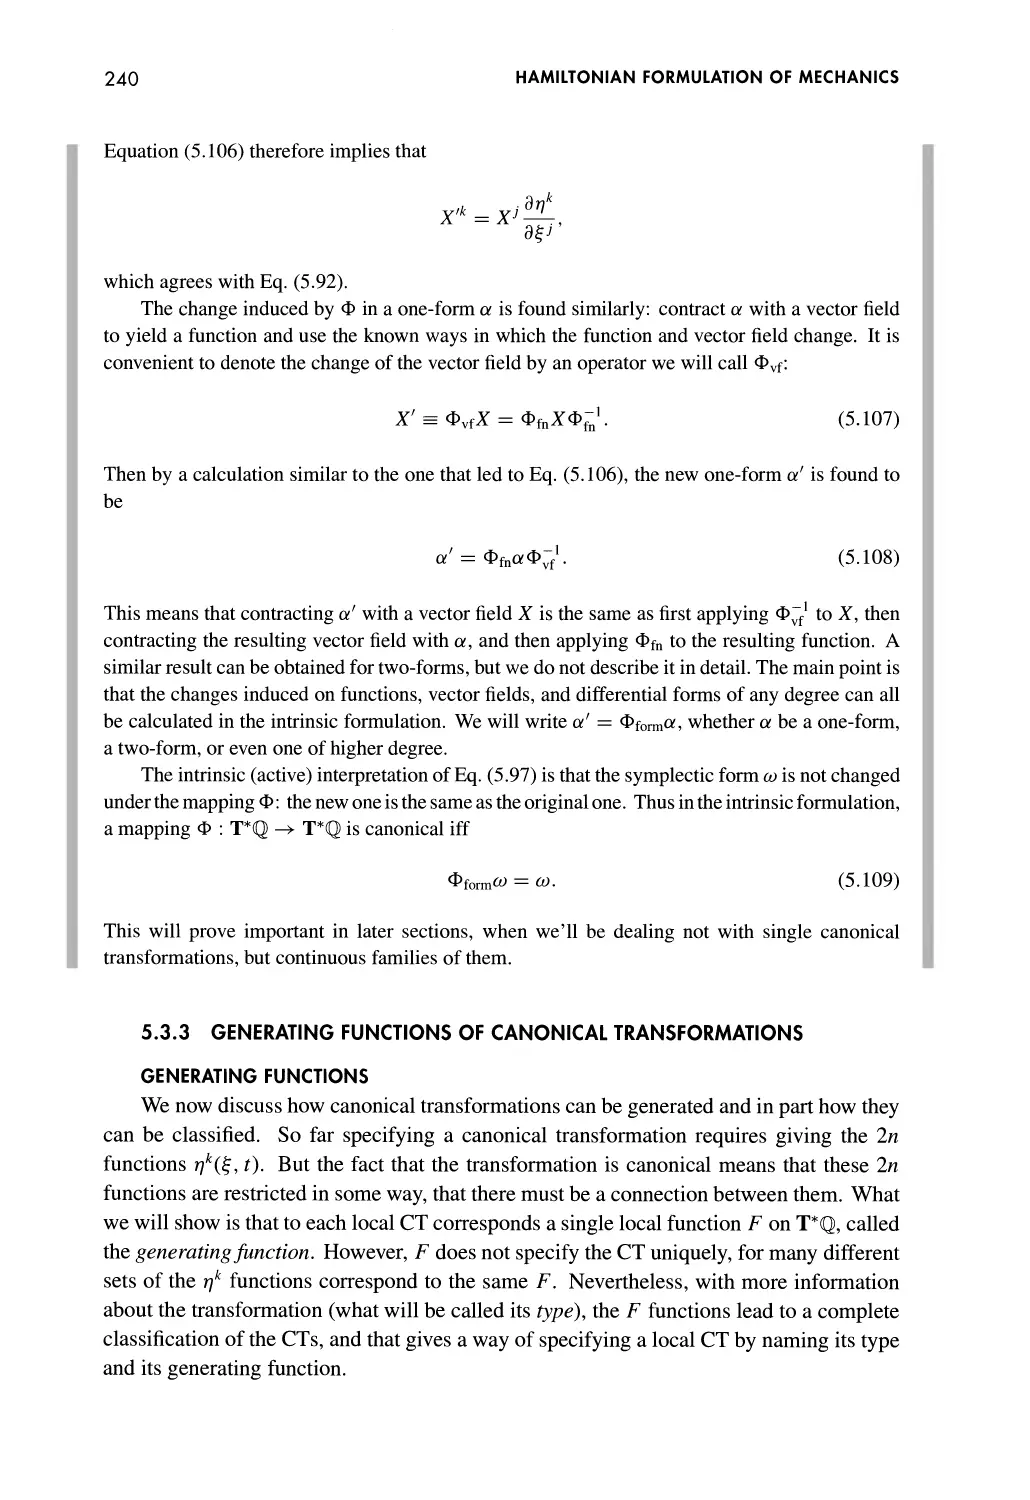 5.3.3 Generating Functions of Canonical Transformations